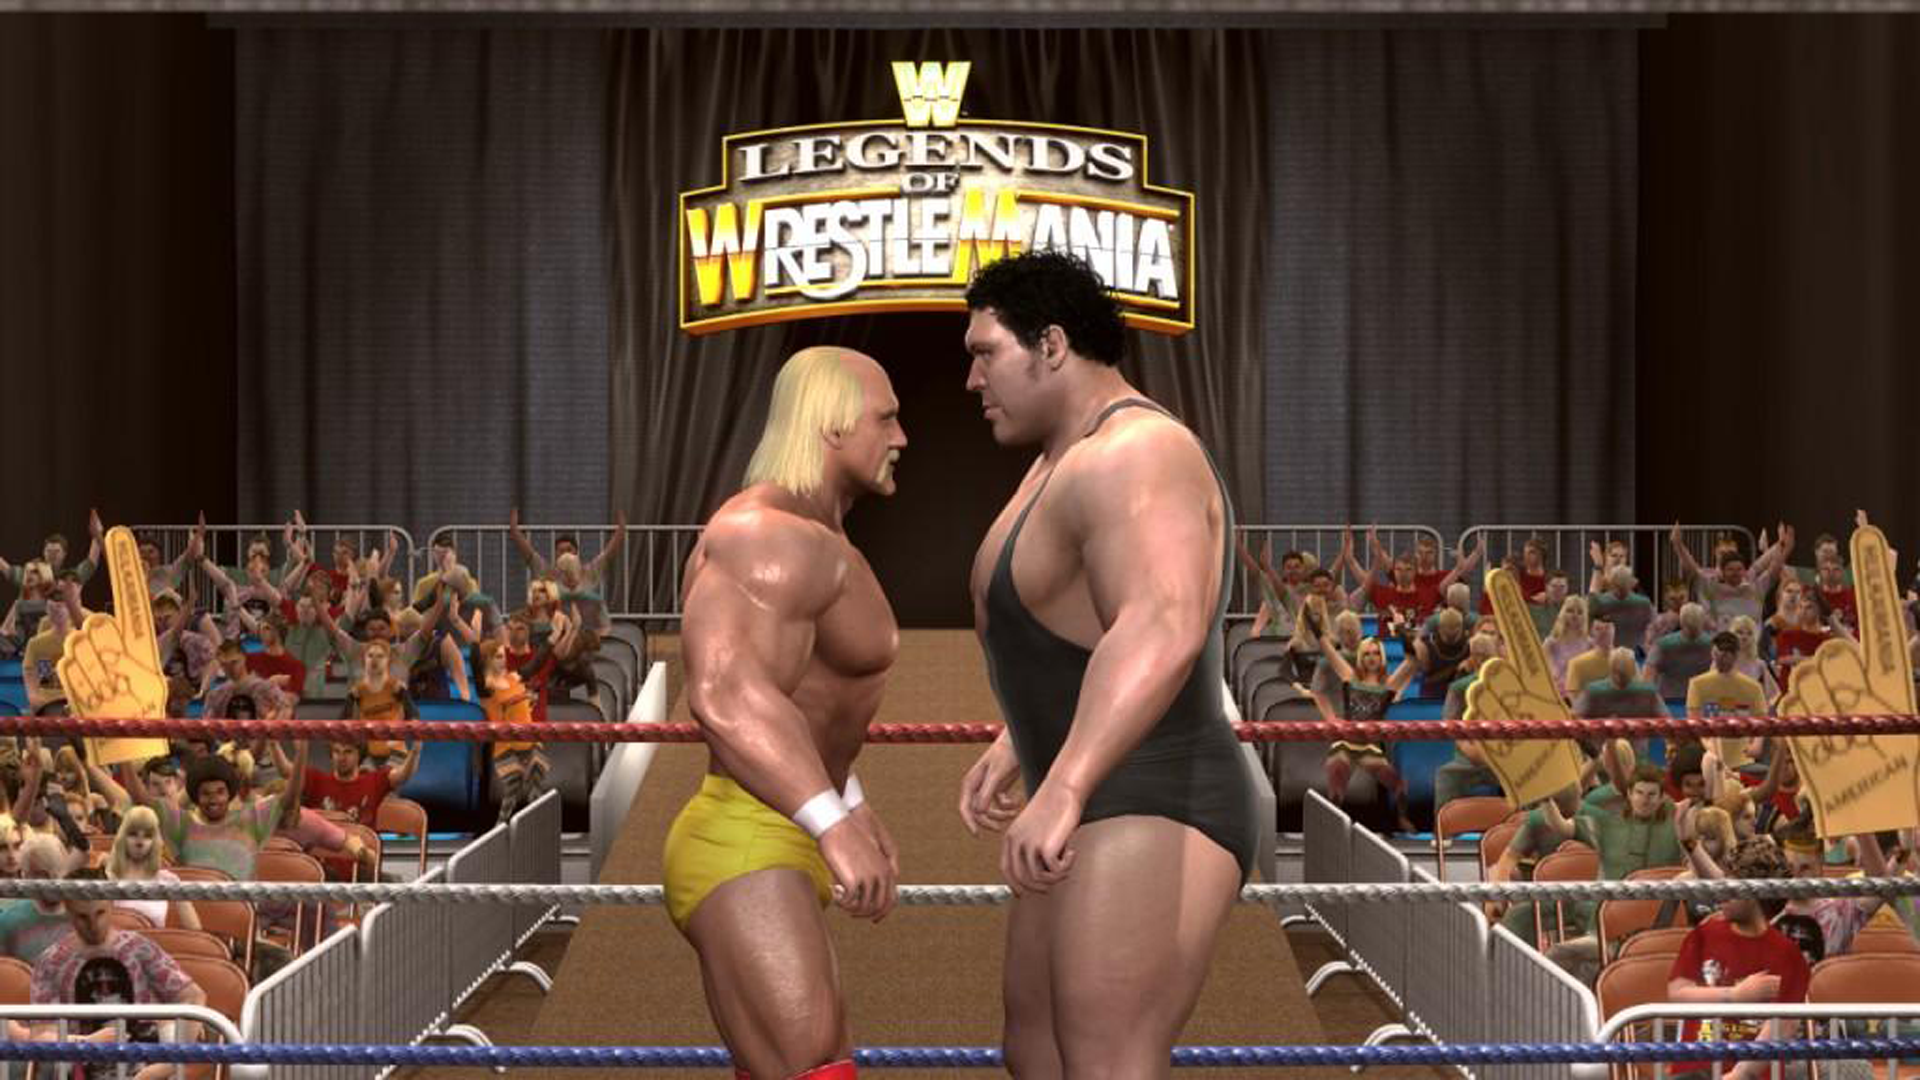 Let’s Play WWE Legends of Wrestlemania